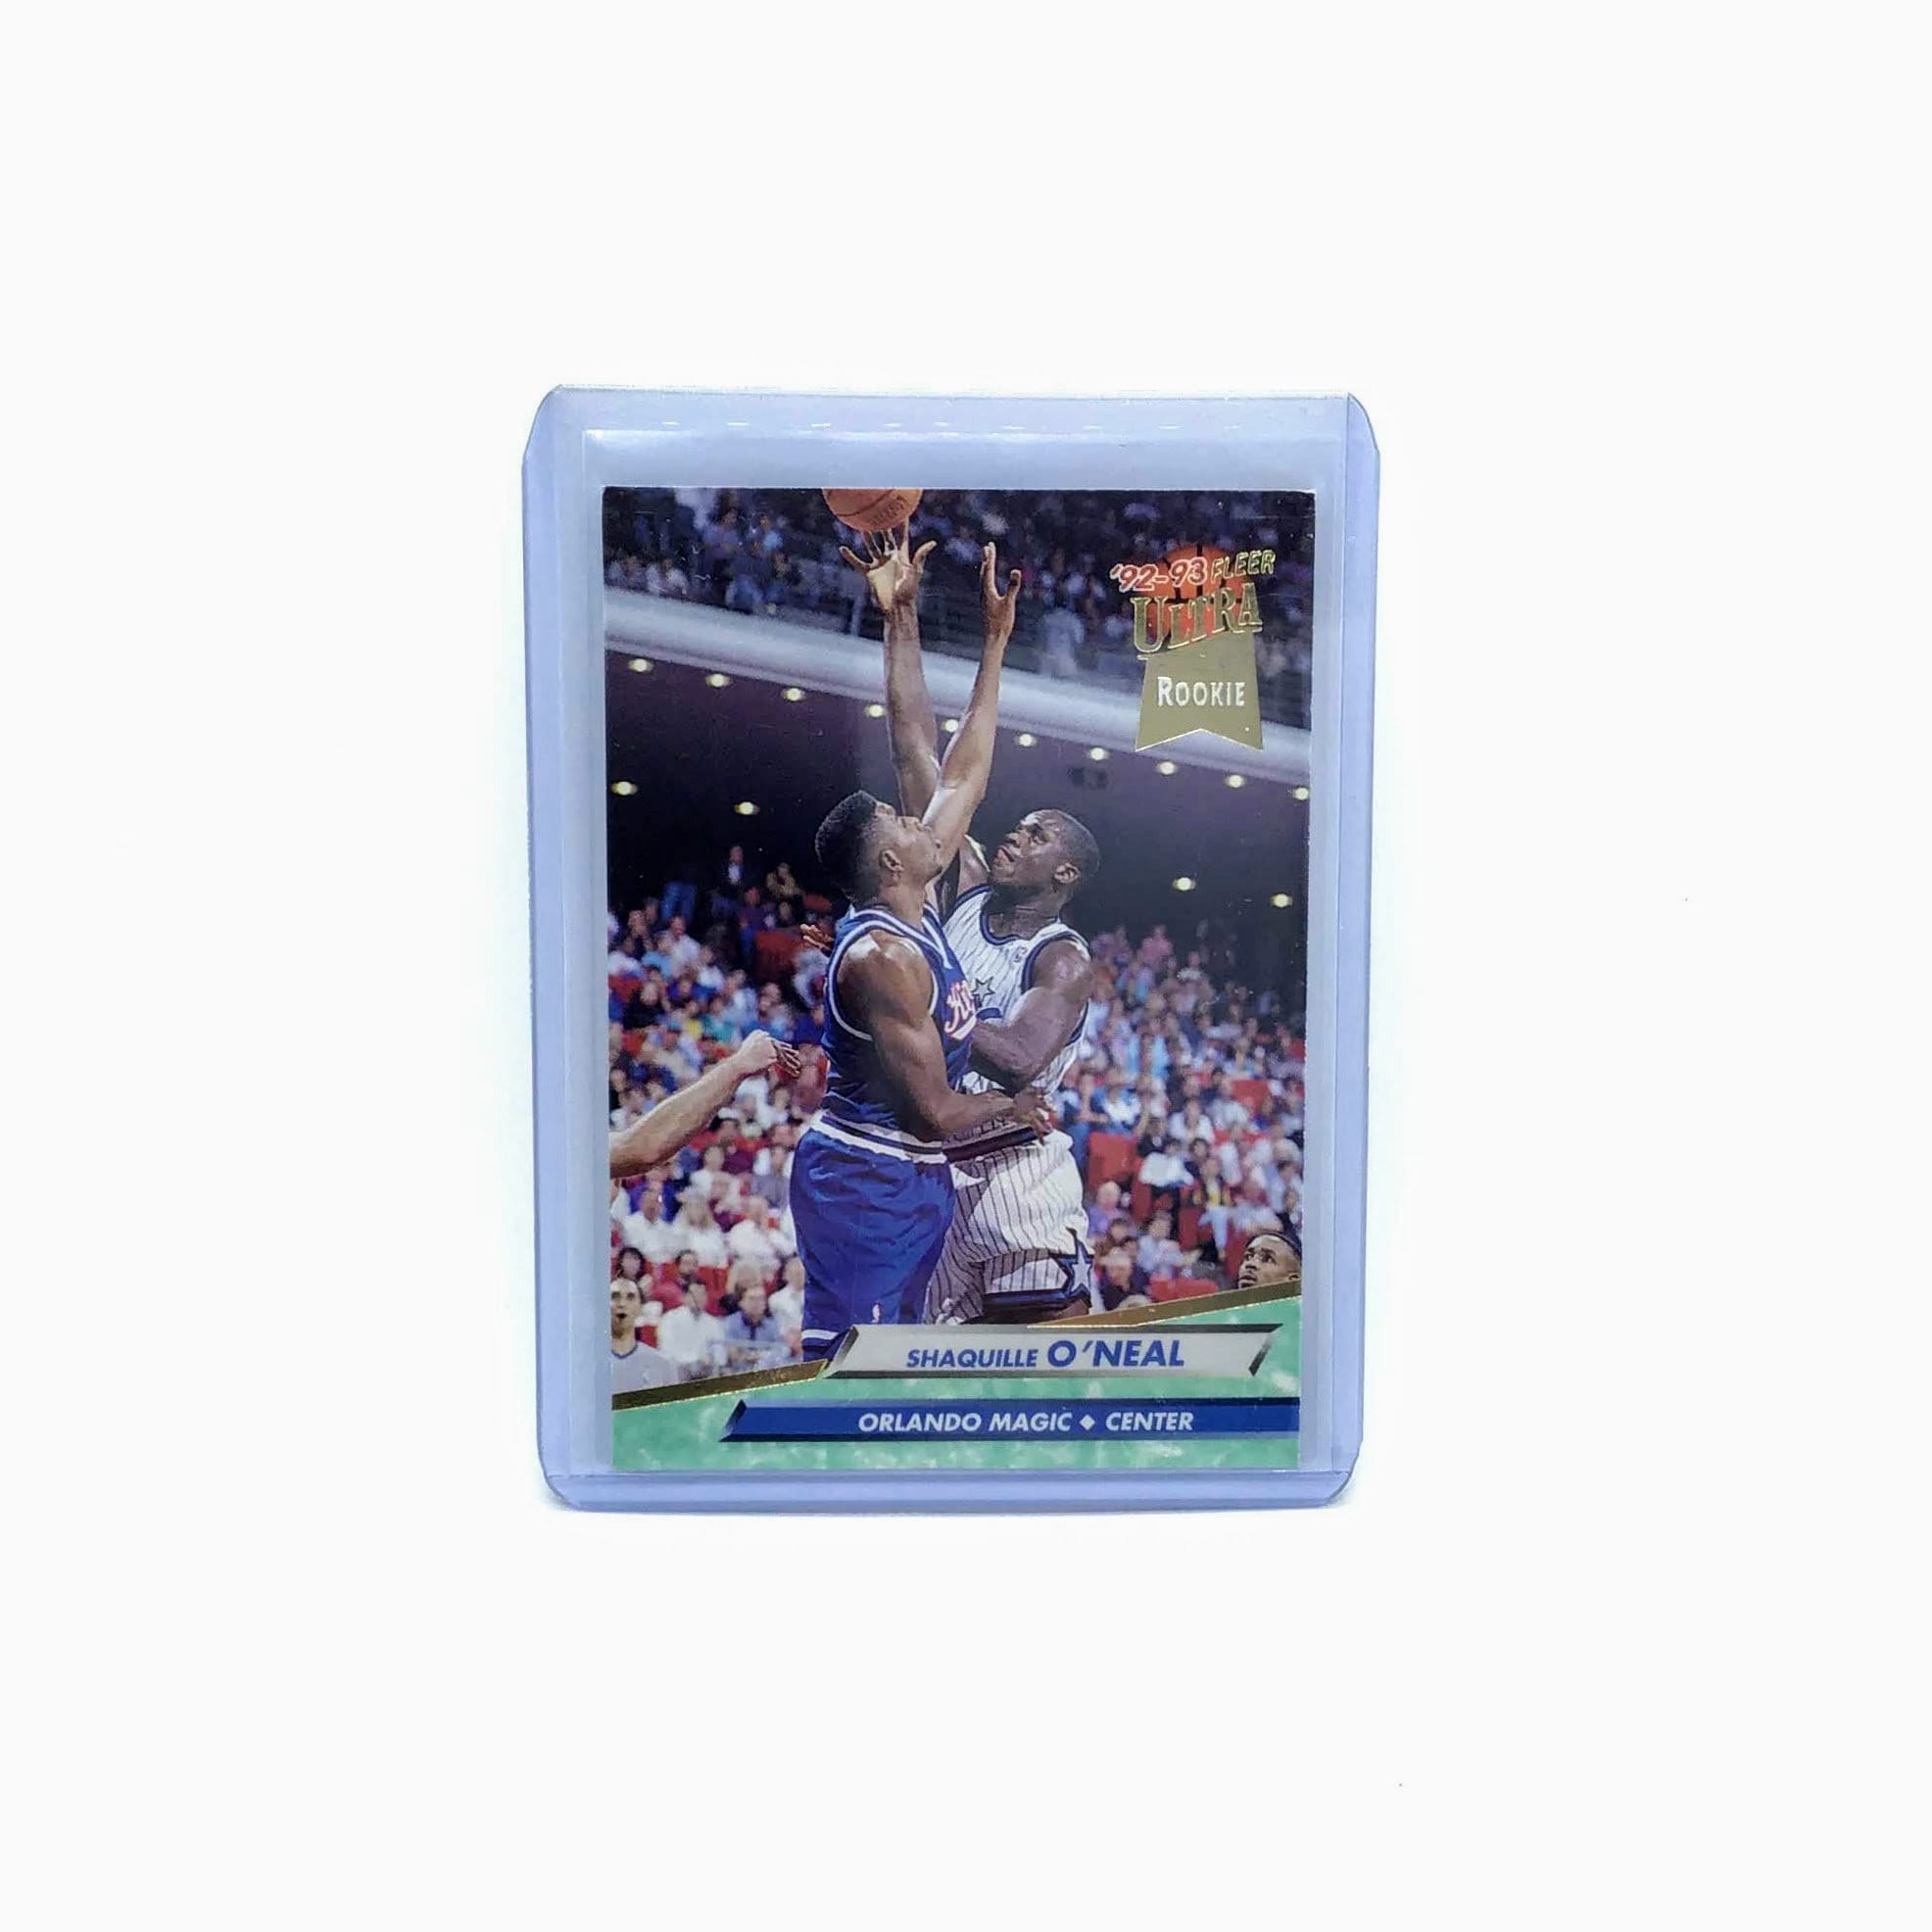 Shaquille O'Neal Rookie Card! Flawless! - Sports Trading Cards